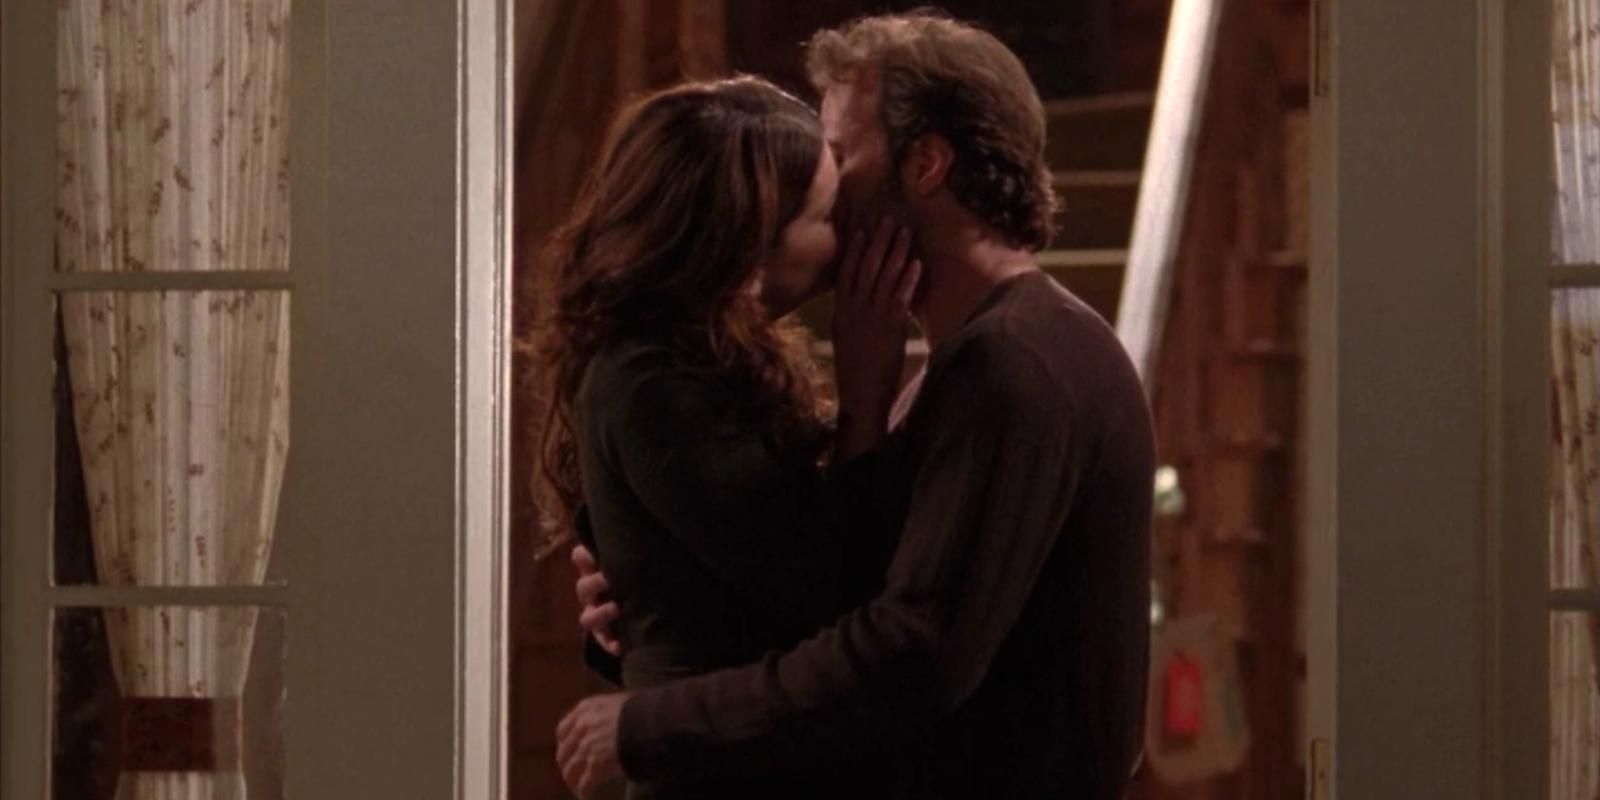 Lorelai Gilmore and Luke Danes kiss for the first time in Gilmore Girls